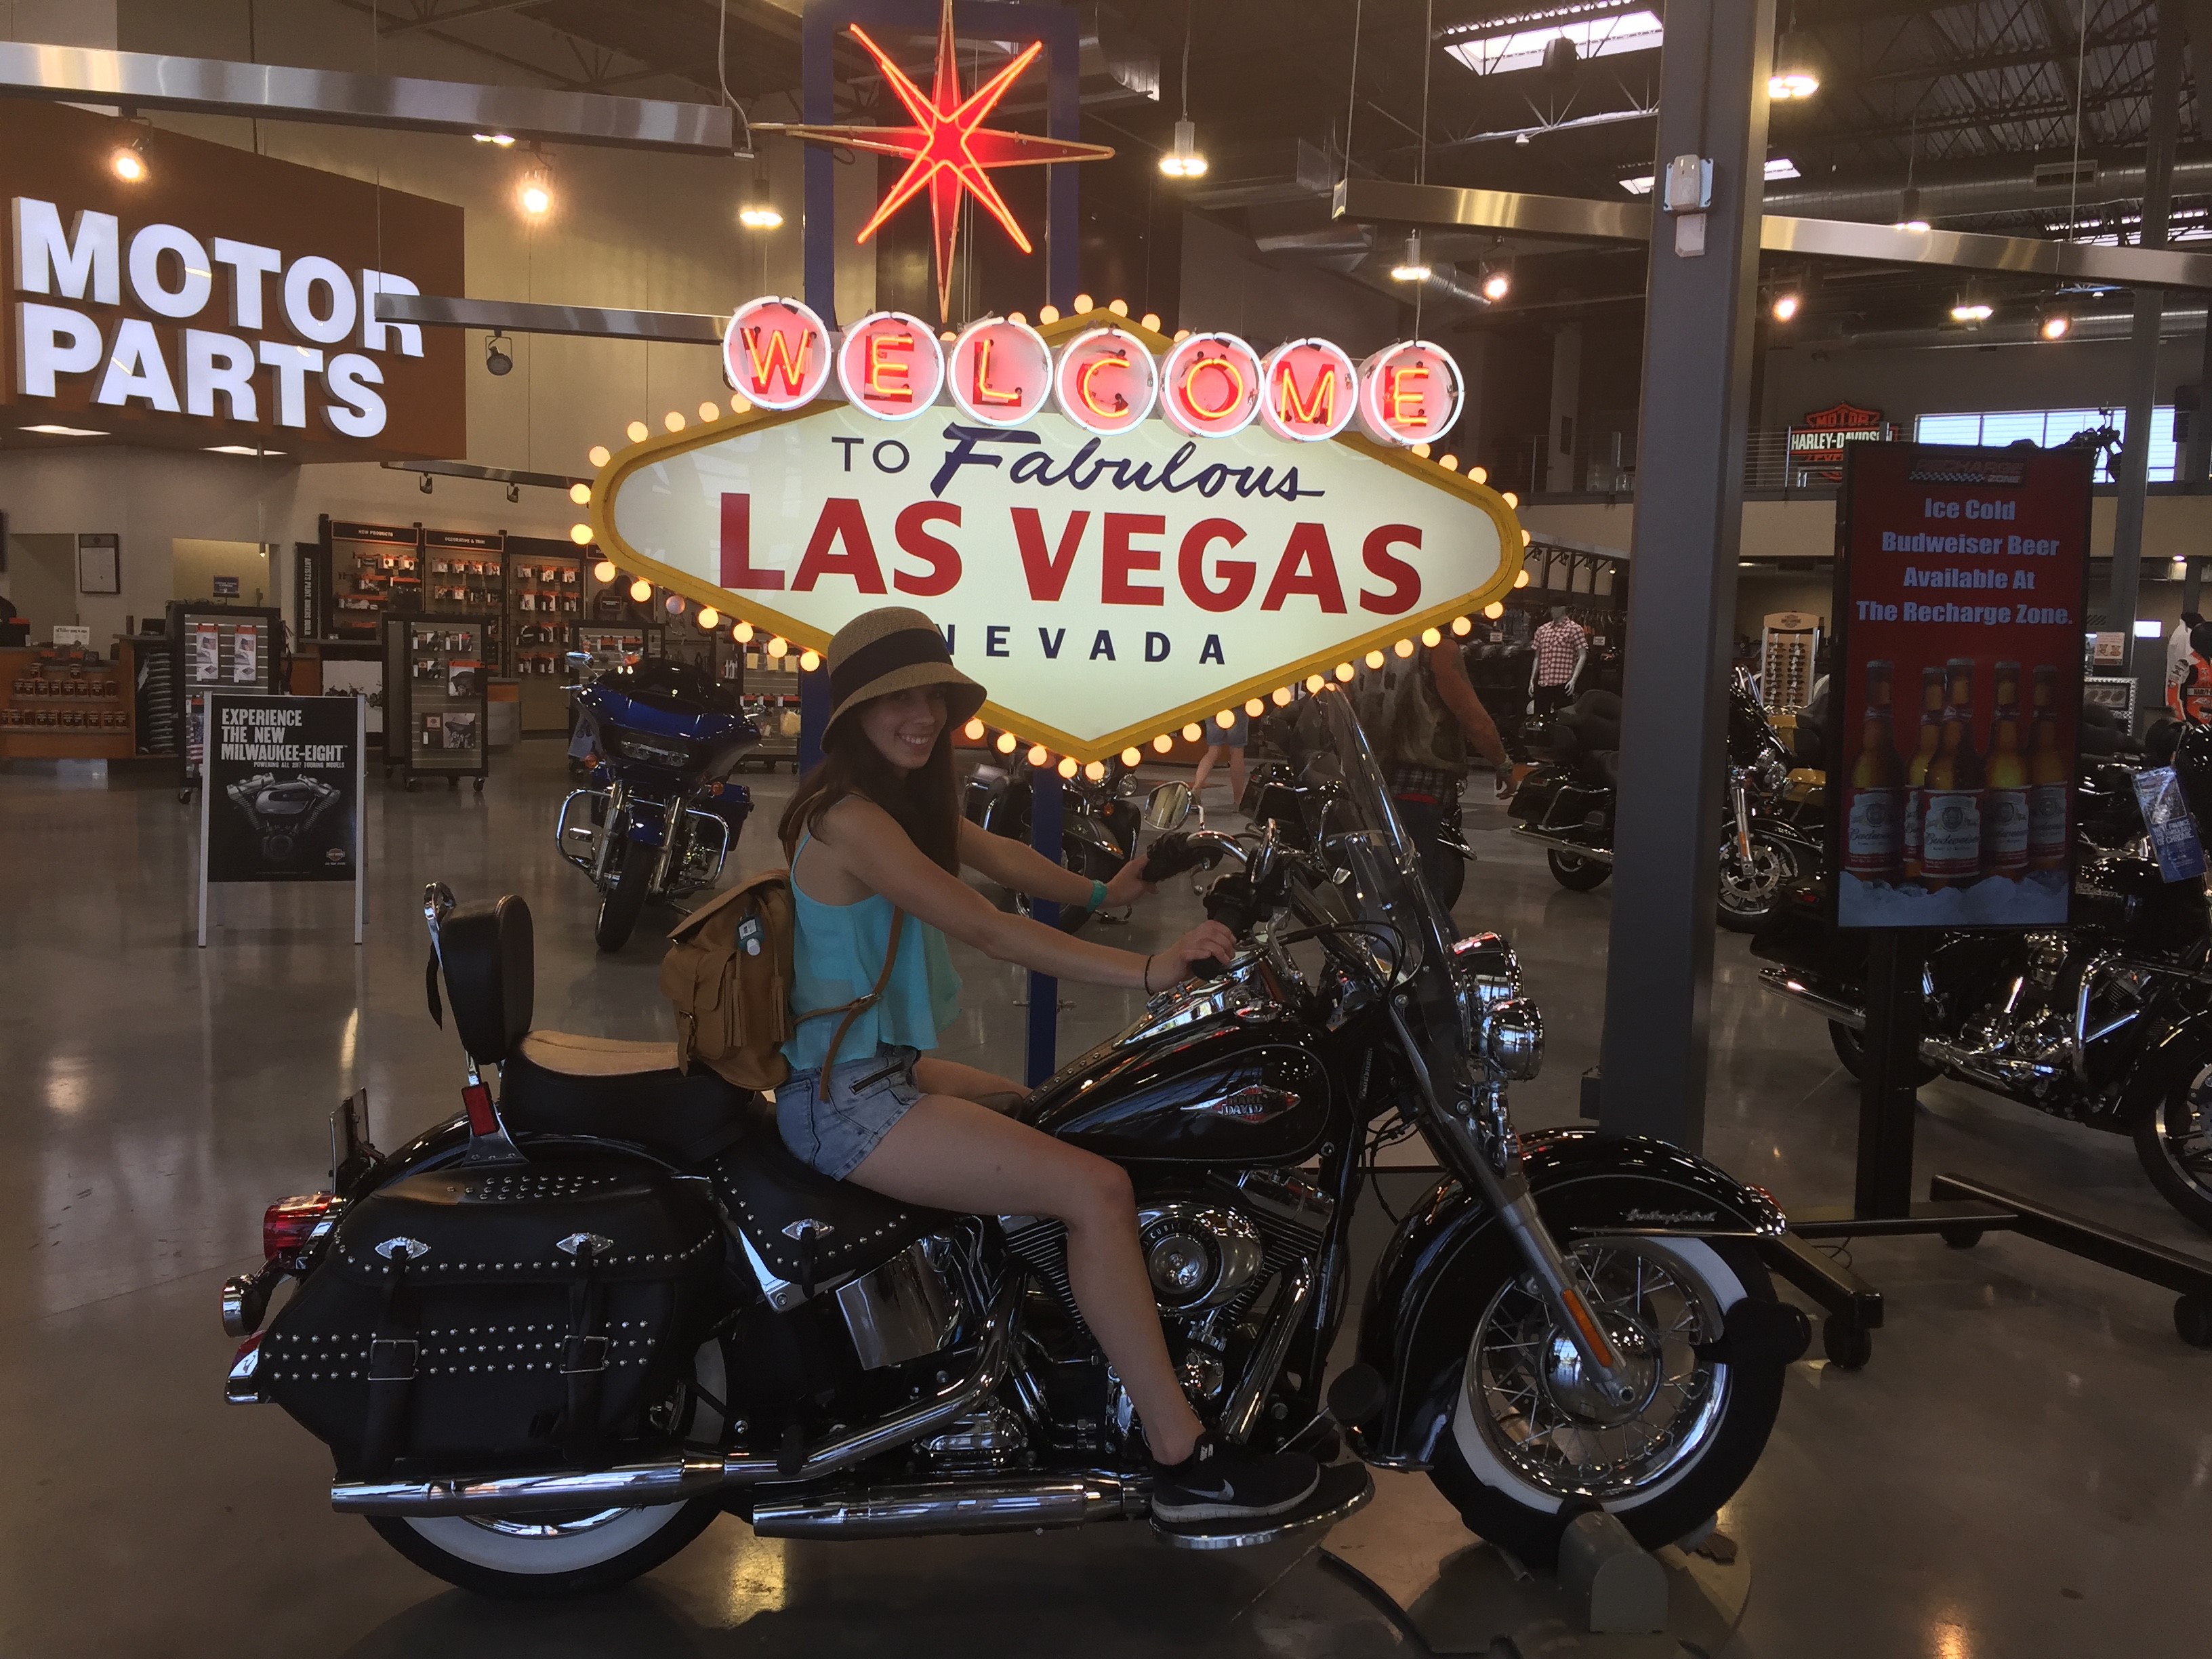 Maria on a Harley Davidson in front of a replica of the infamous Las Vegas sign.